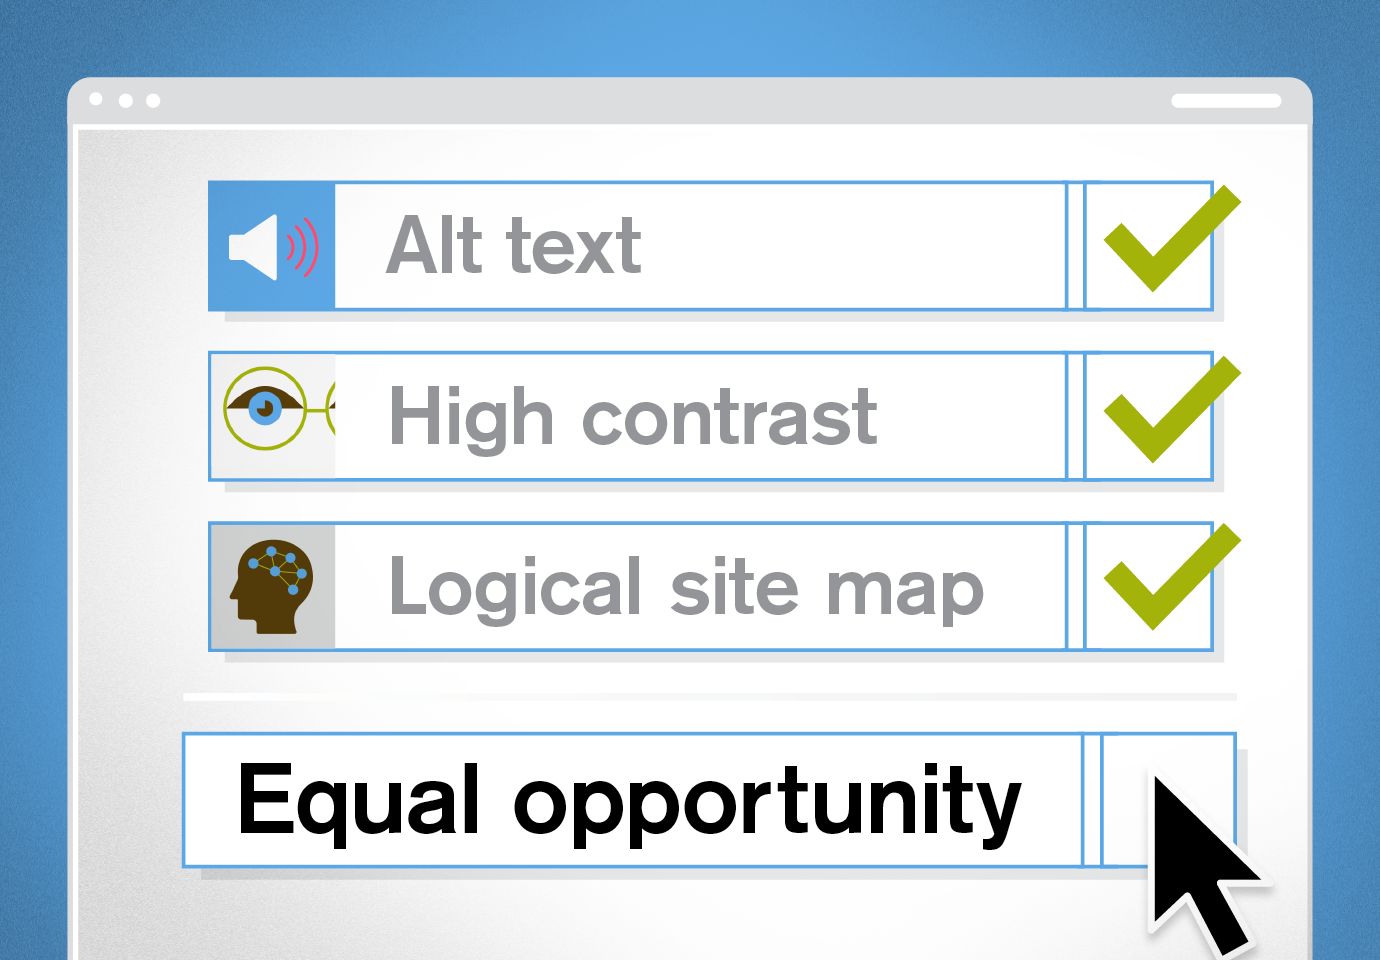 Illustration of a computer screen with an ADA web compliance checklist with “equal opportunity” last on the list.